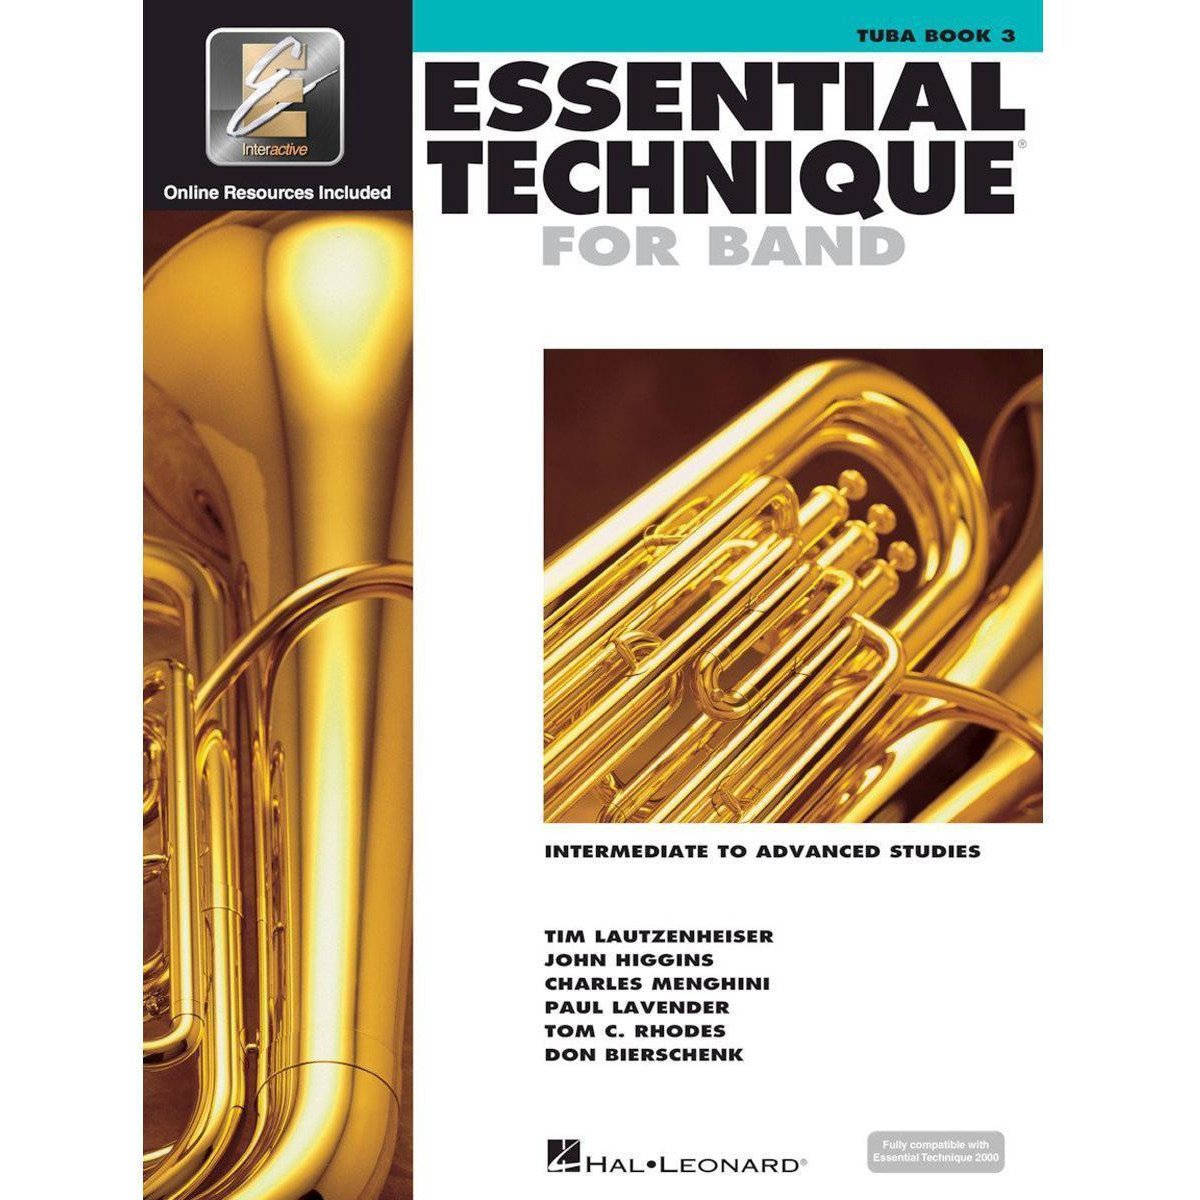 Essential Technique for Band Book 3-Tuba-Andy's Music